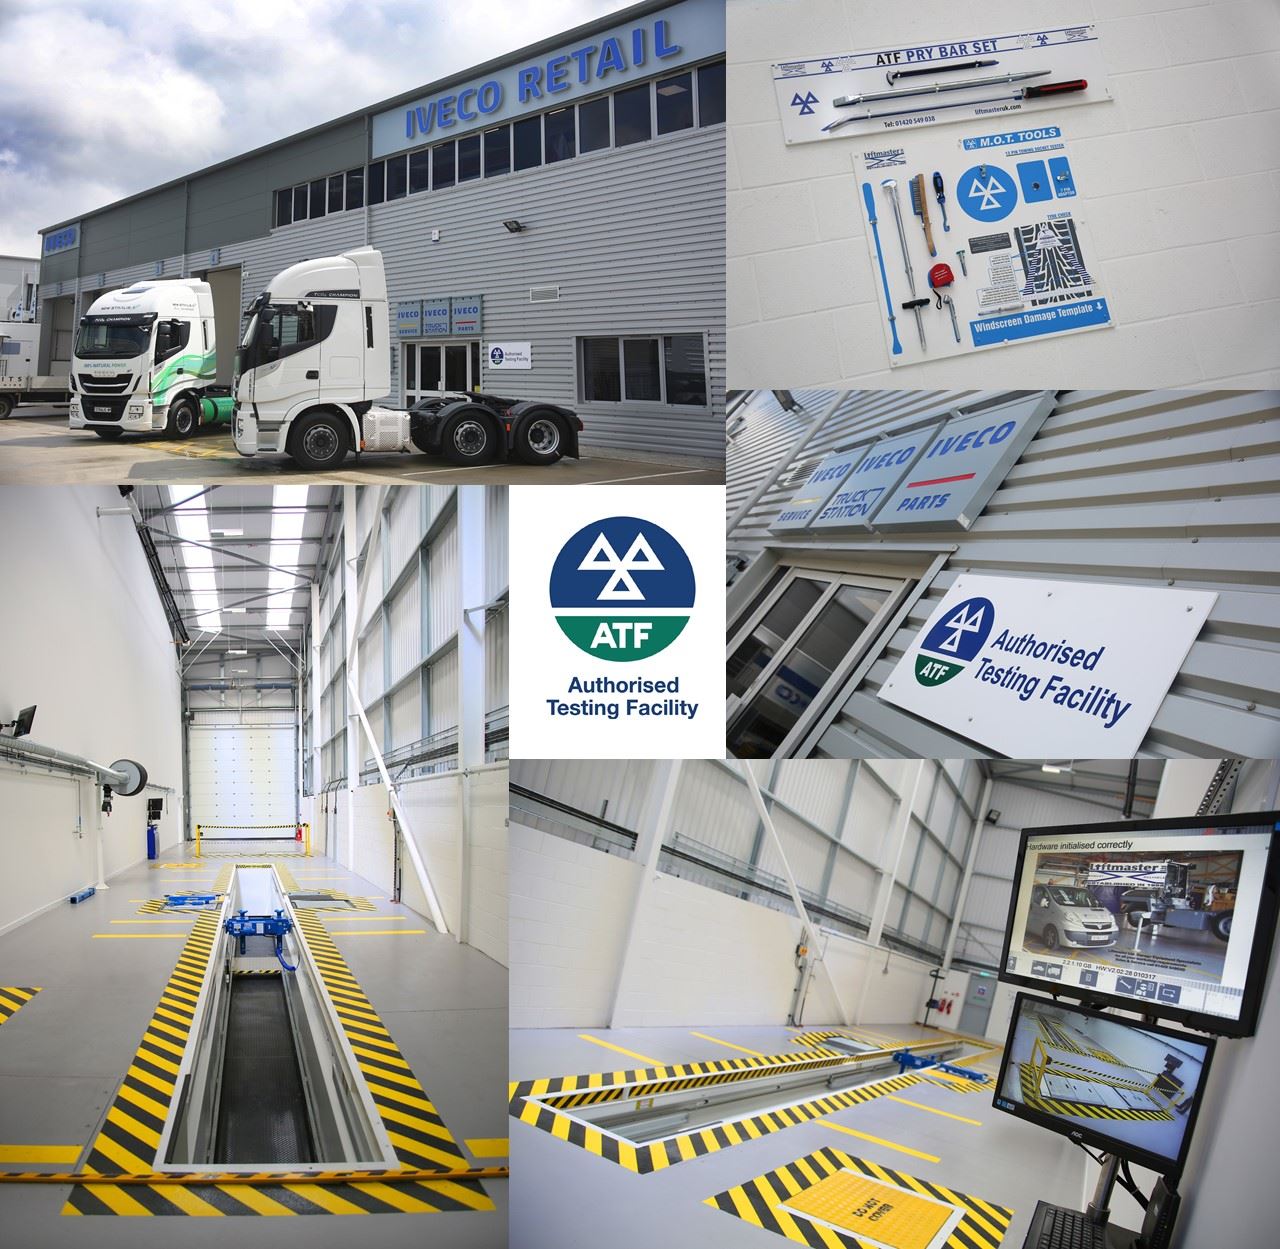 VOSA ATF | Authorised Testing Facility now open | Truck Repair | IVECO Retail London